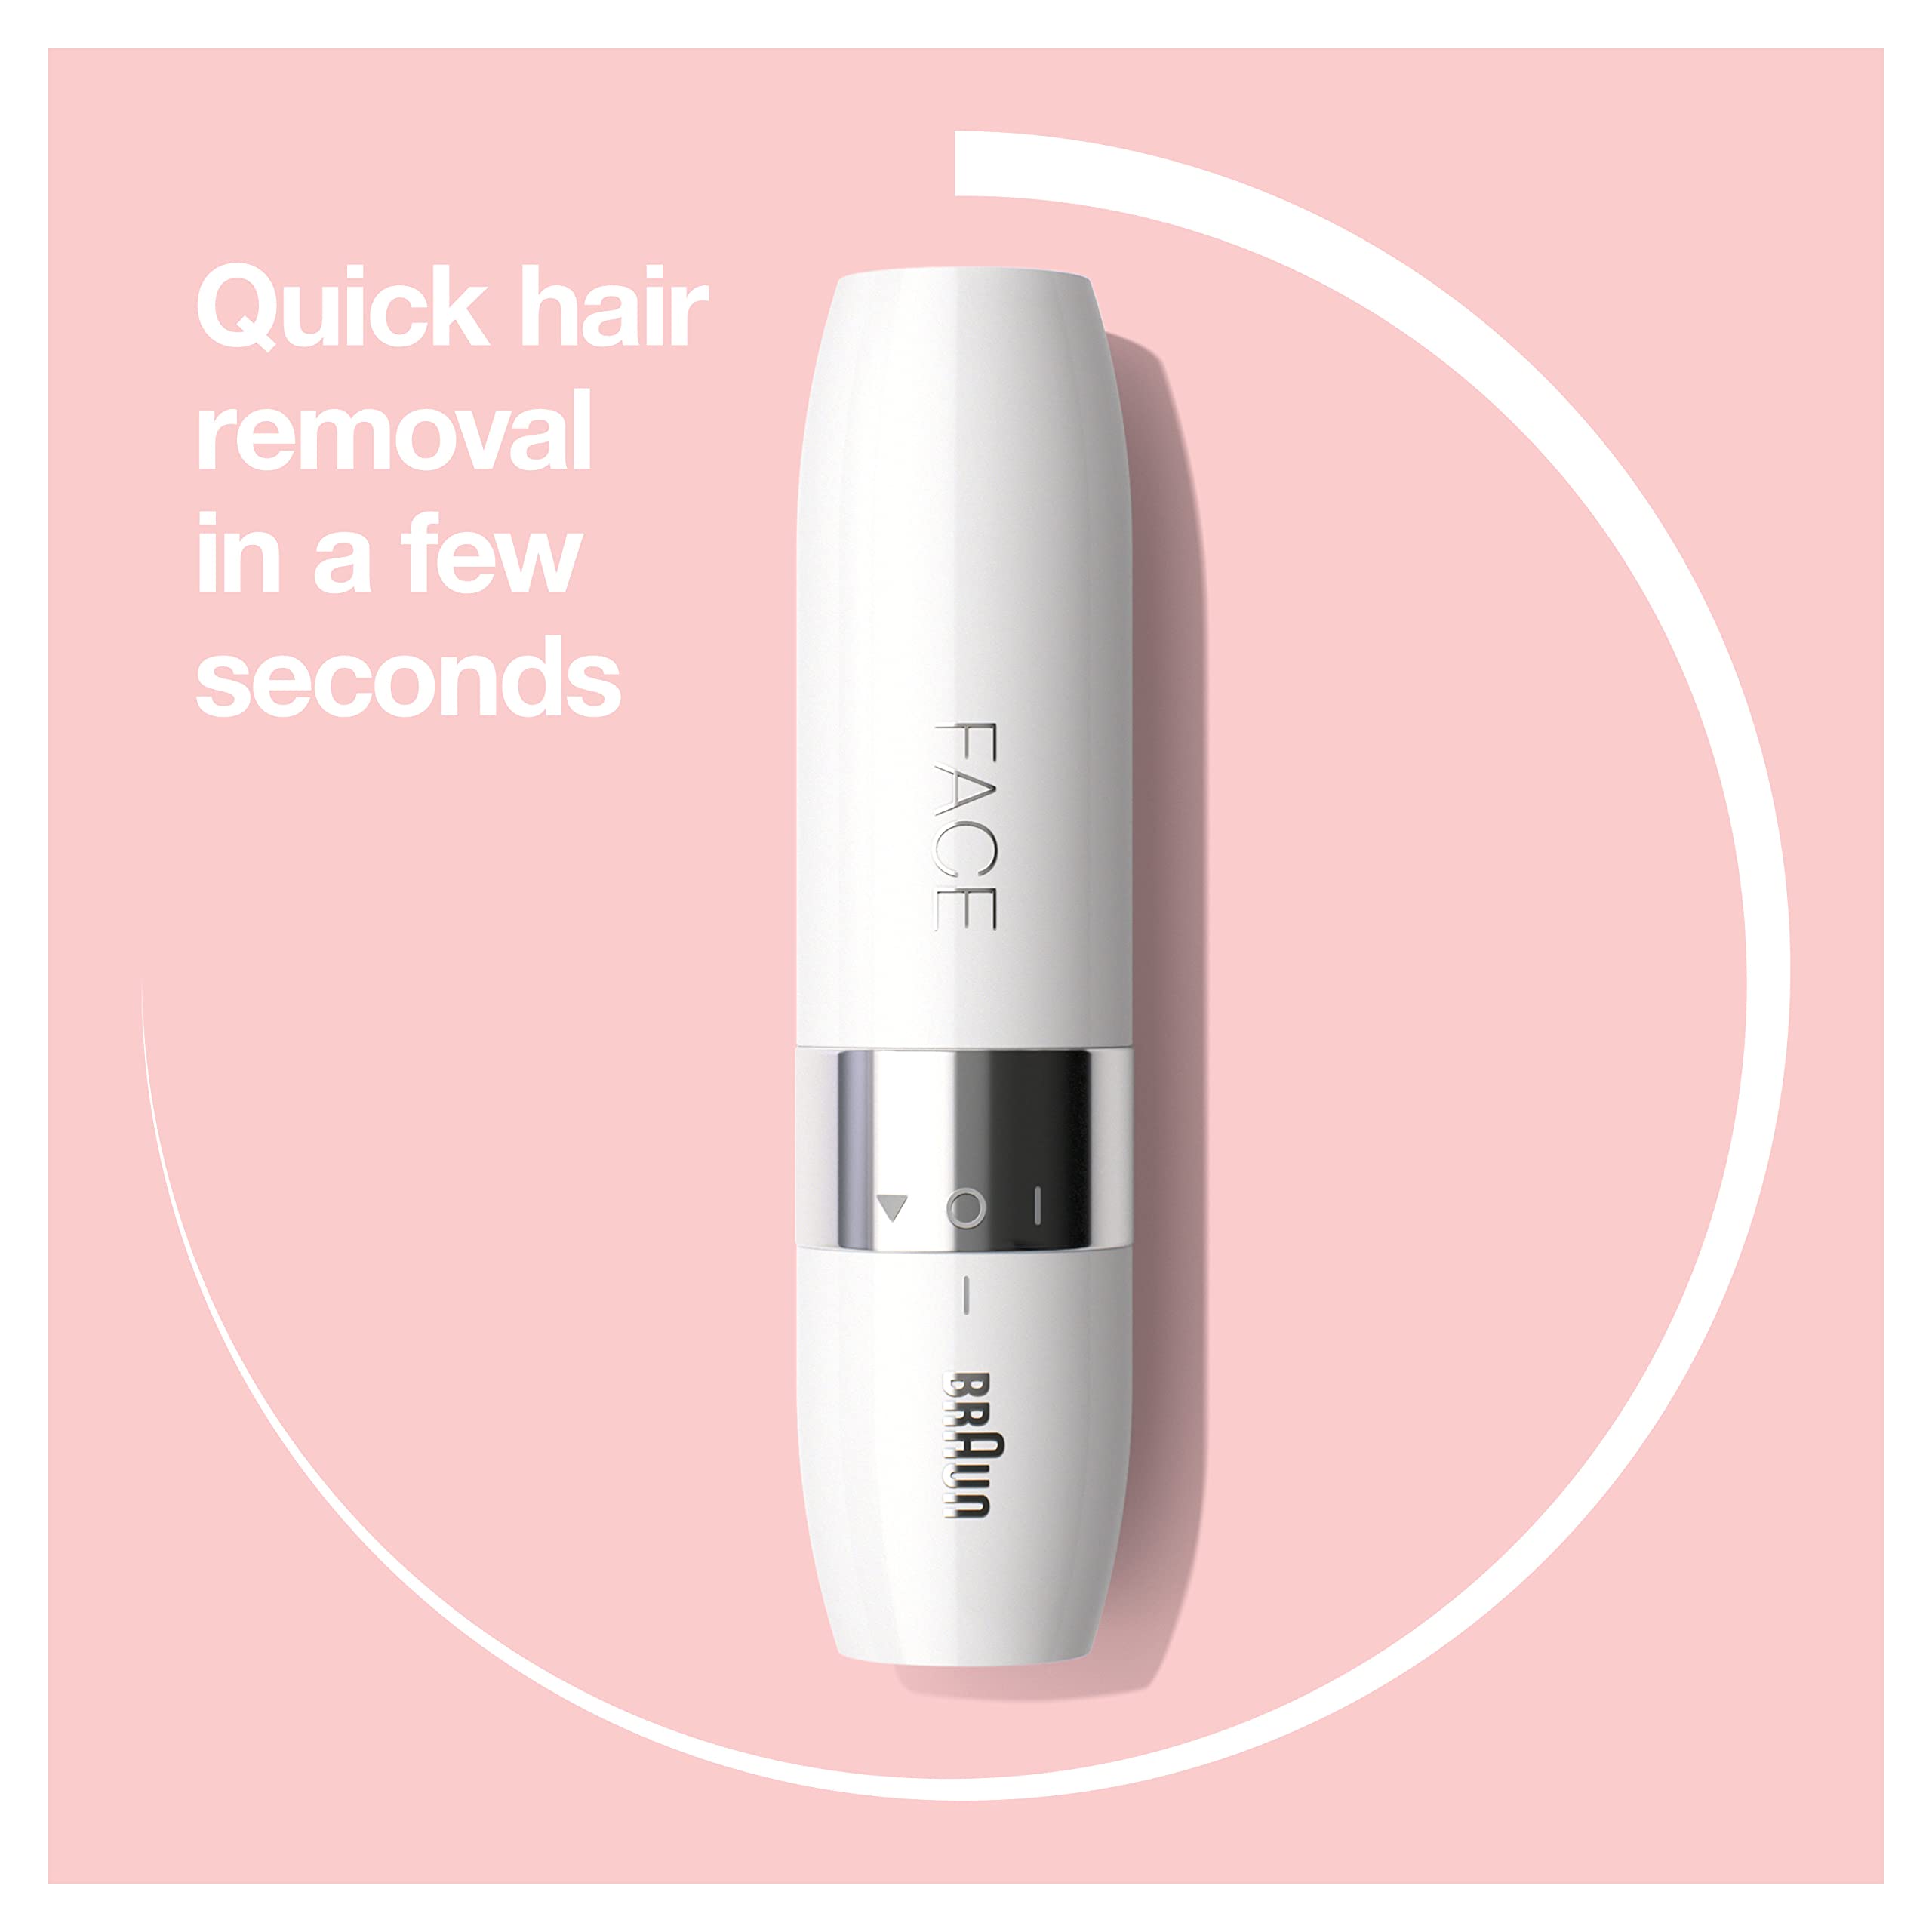 Braun Mini Hair Remover, Electric Facial Hair Removal for Women, Quick & Gentle, Finishing Touch for Upper Lips, Chin & Cheeks, for Easier Makeup Application, Ideal for On-The-Go, with Smartlight